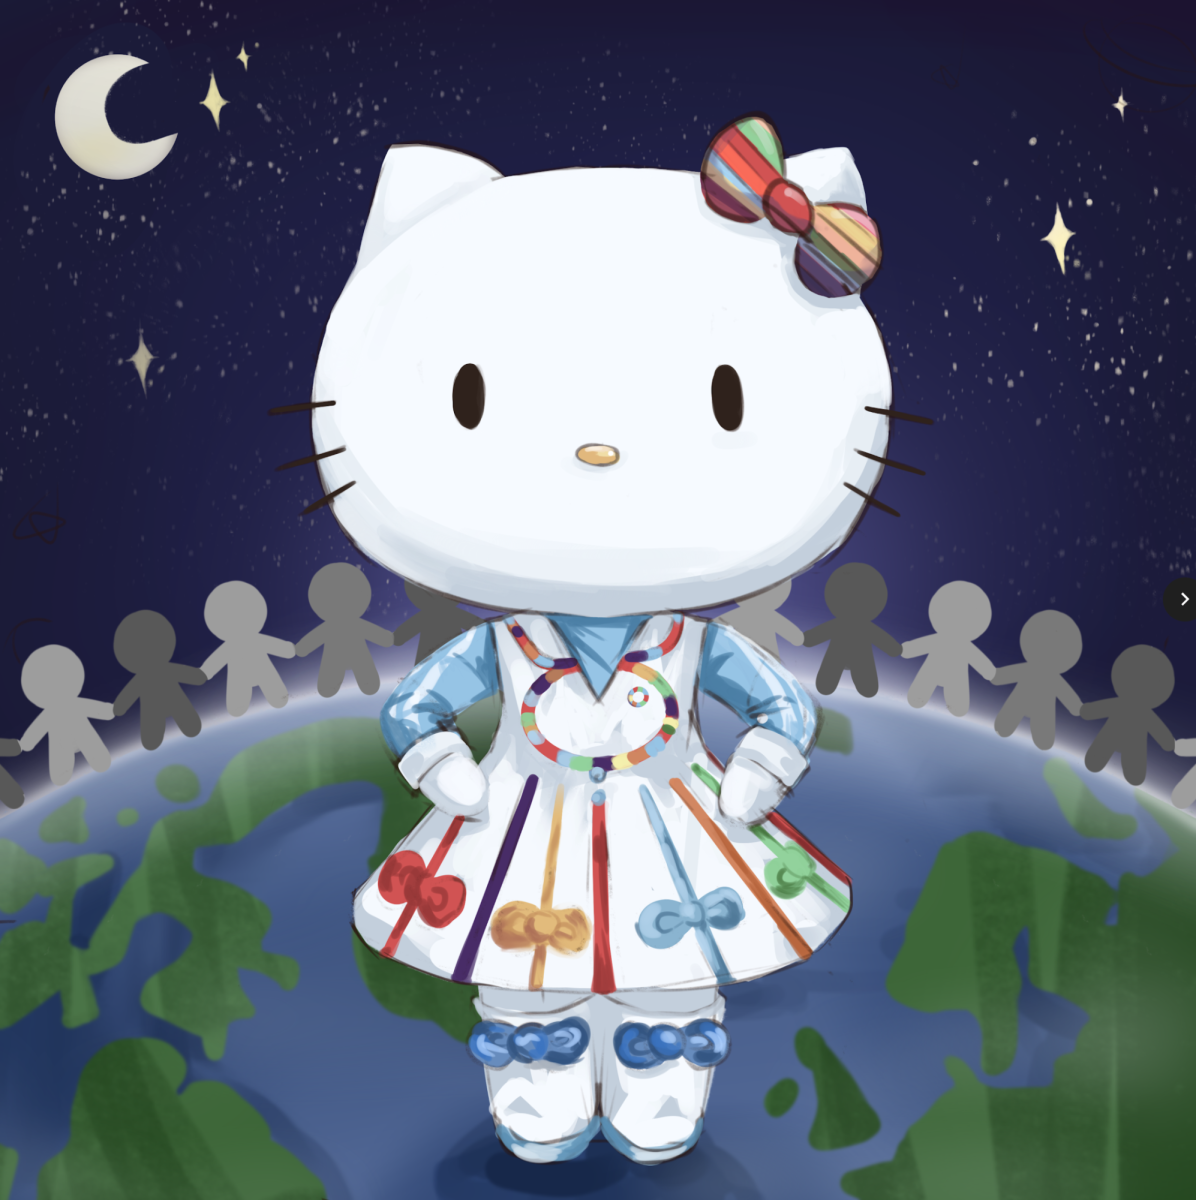 SANRIO+SUPERHERO%3A+Hello+Kitty+is+more+than+just+a+character%3A+she+is+an+activist.